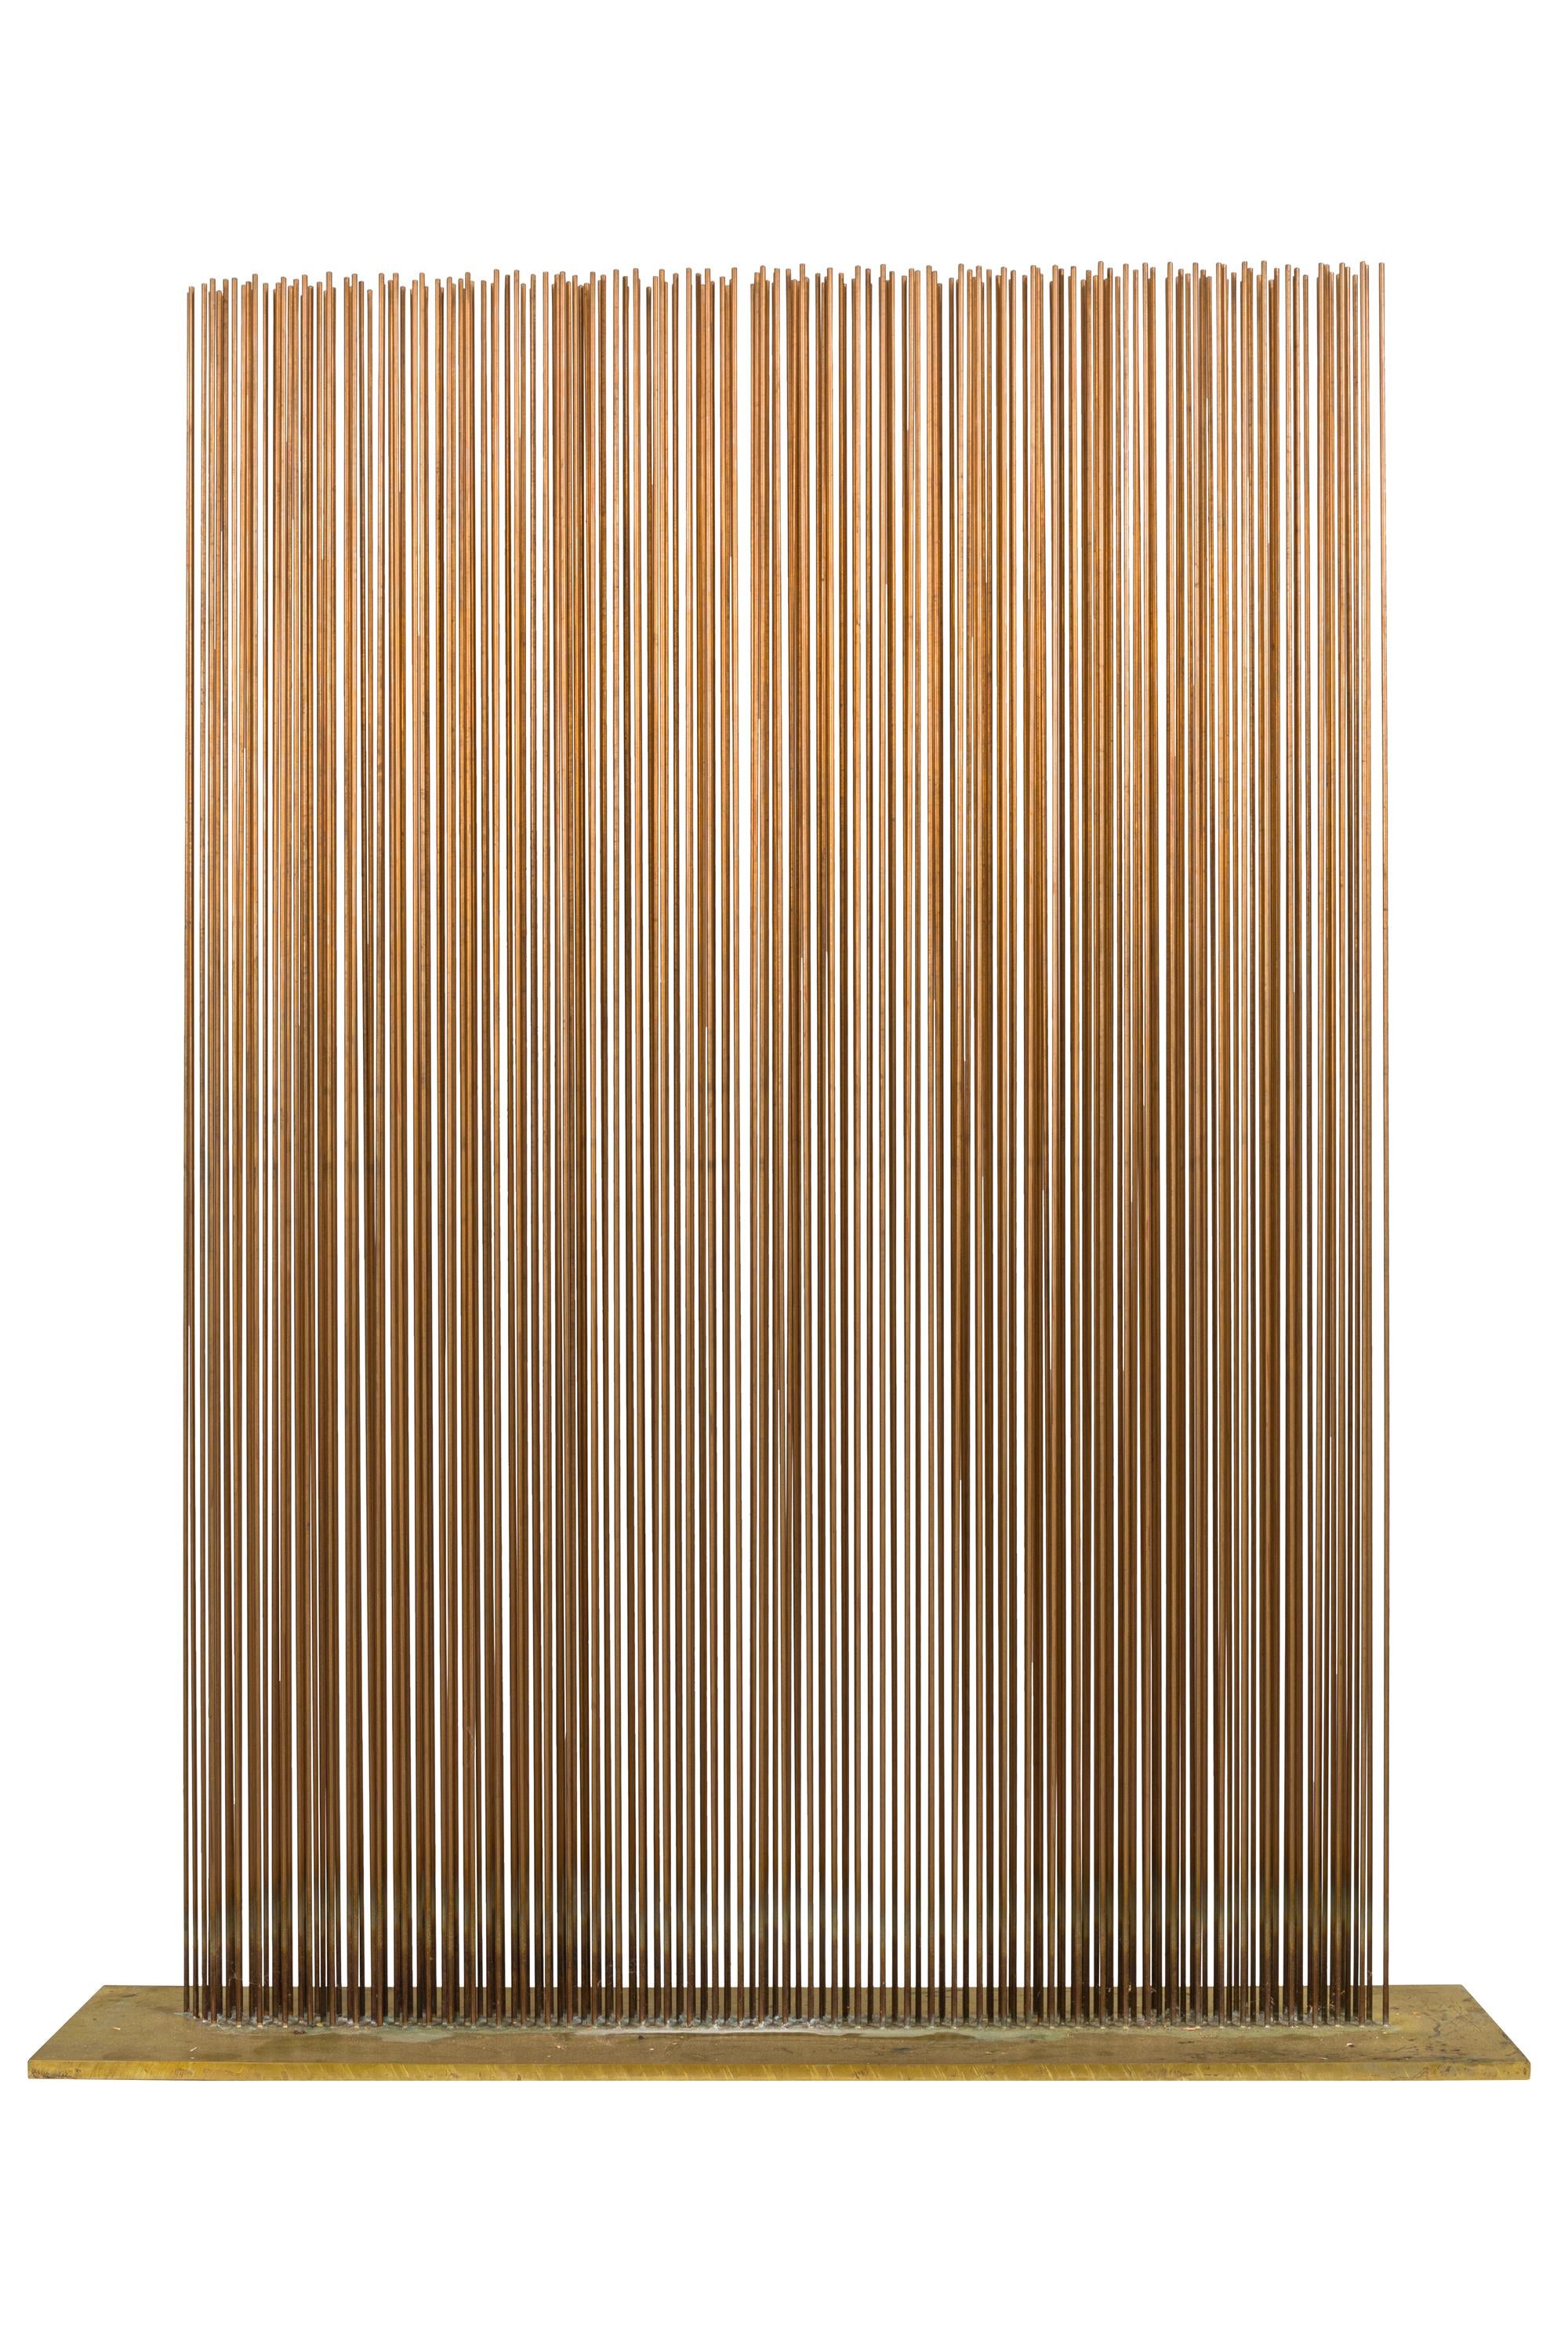 American Val Bertoia Linear Four-Row Copper and Brass Sonambient Sculpture, USA 2018